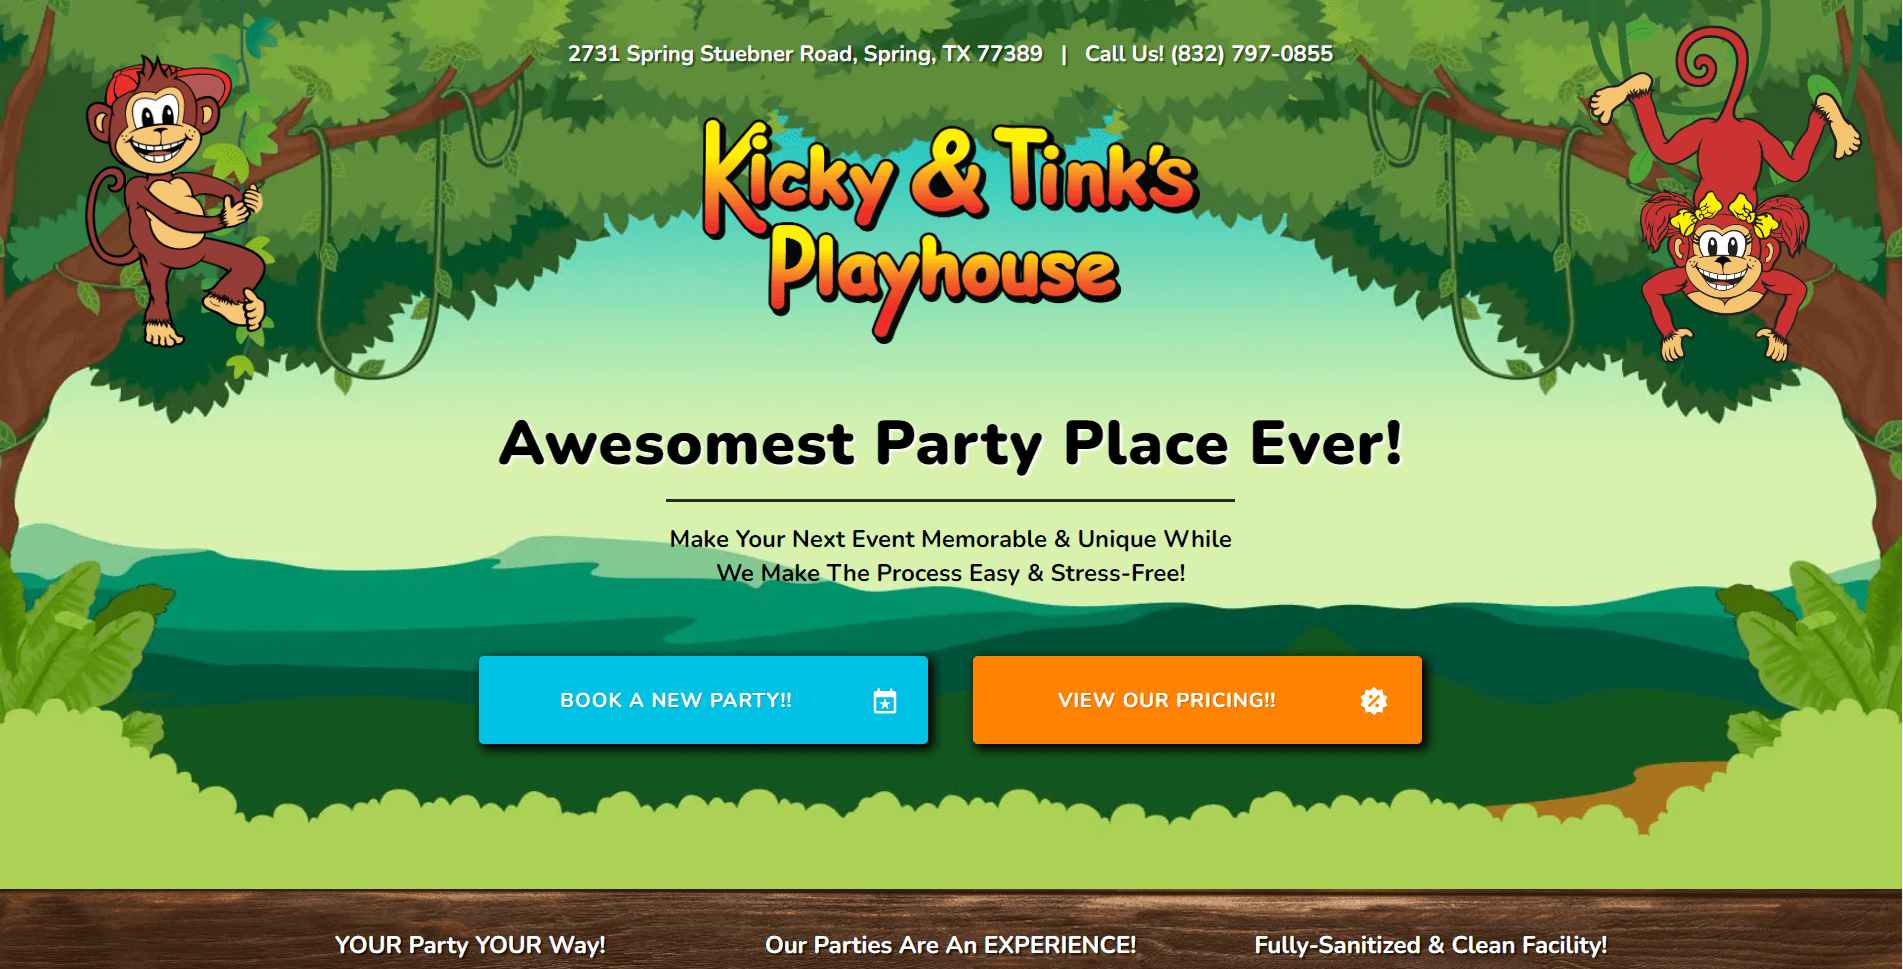 Completed website for Kicky & Tinks' Playhouse - a party and event business in Spring, TX